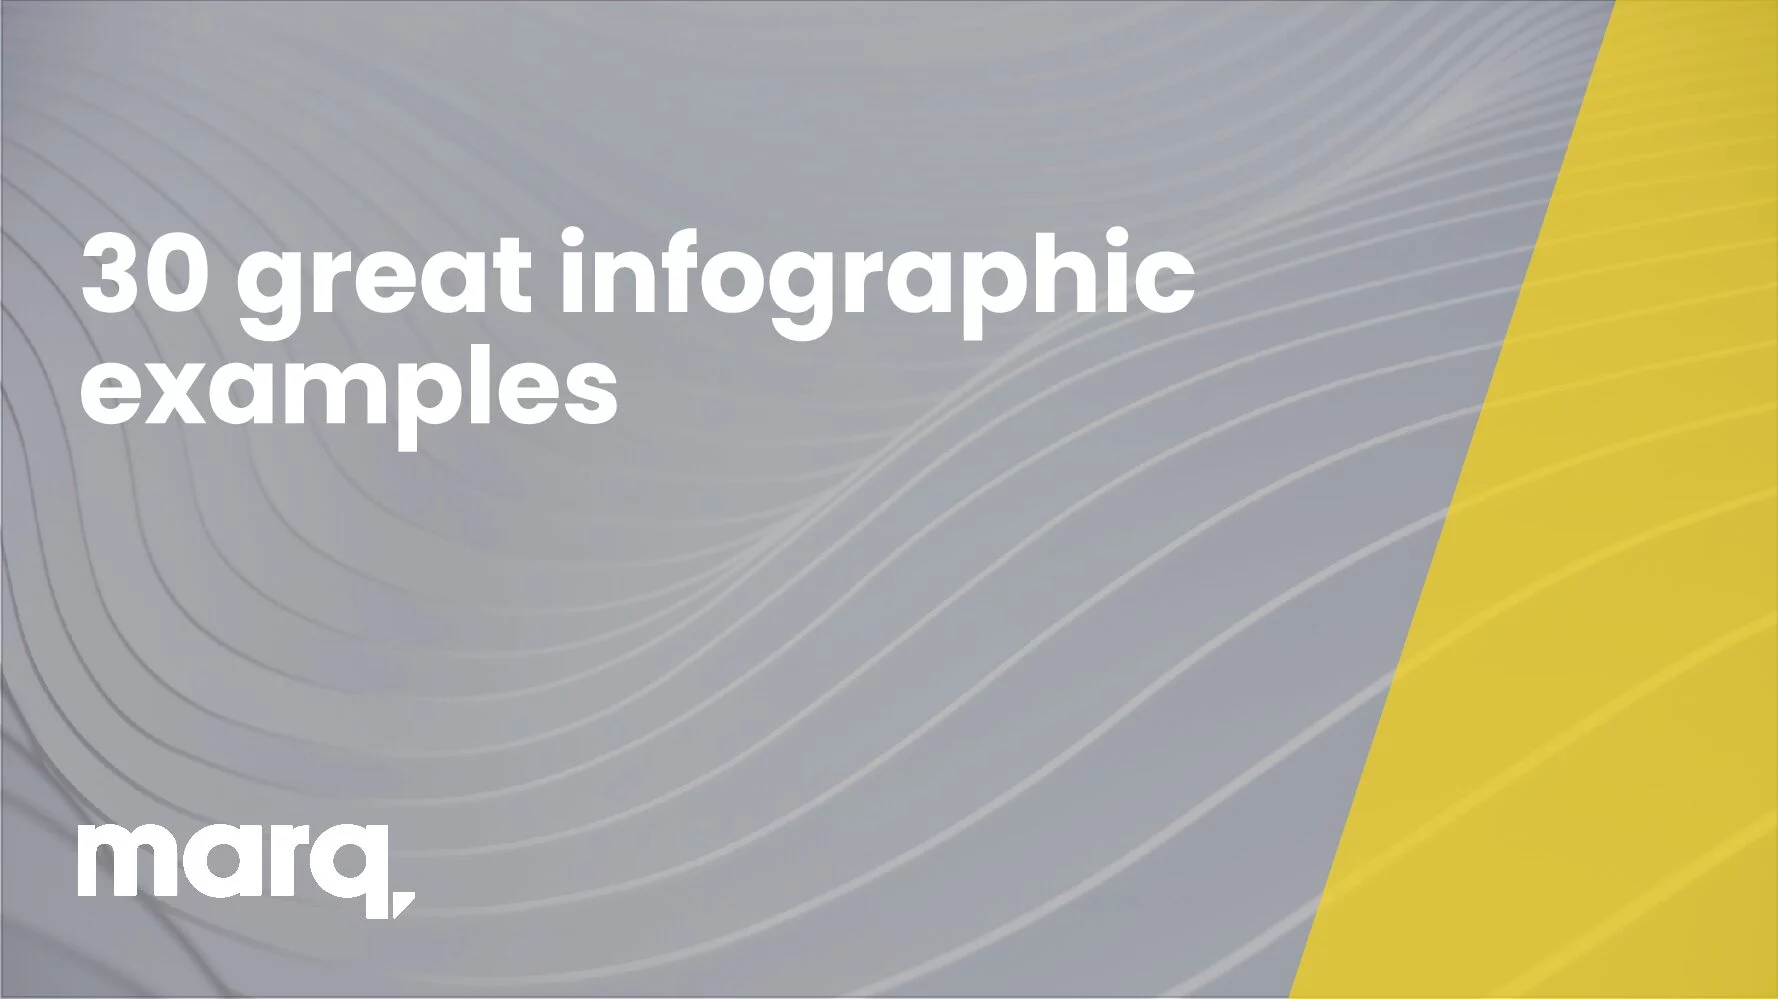 30 great infographic examples